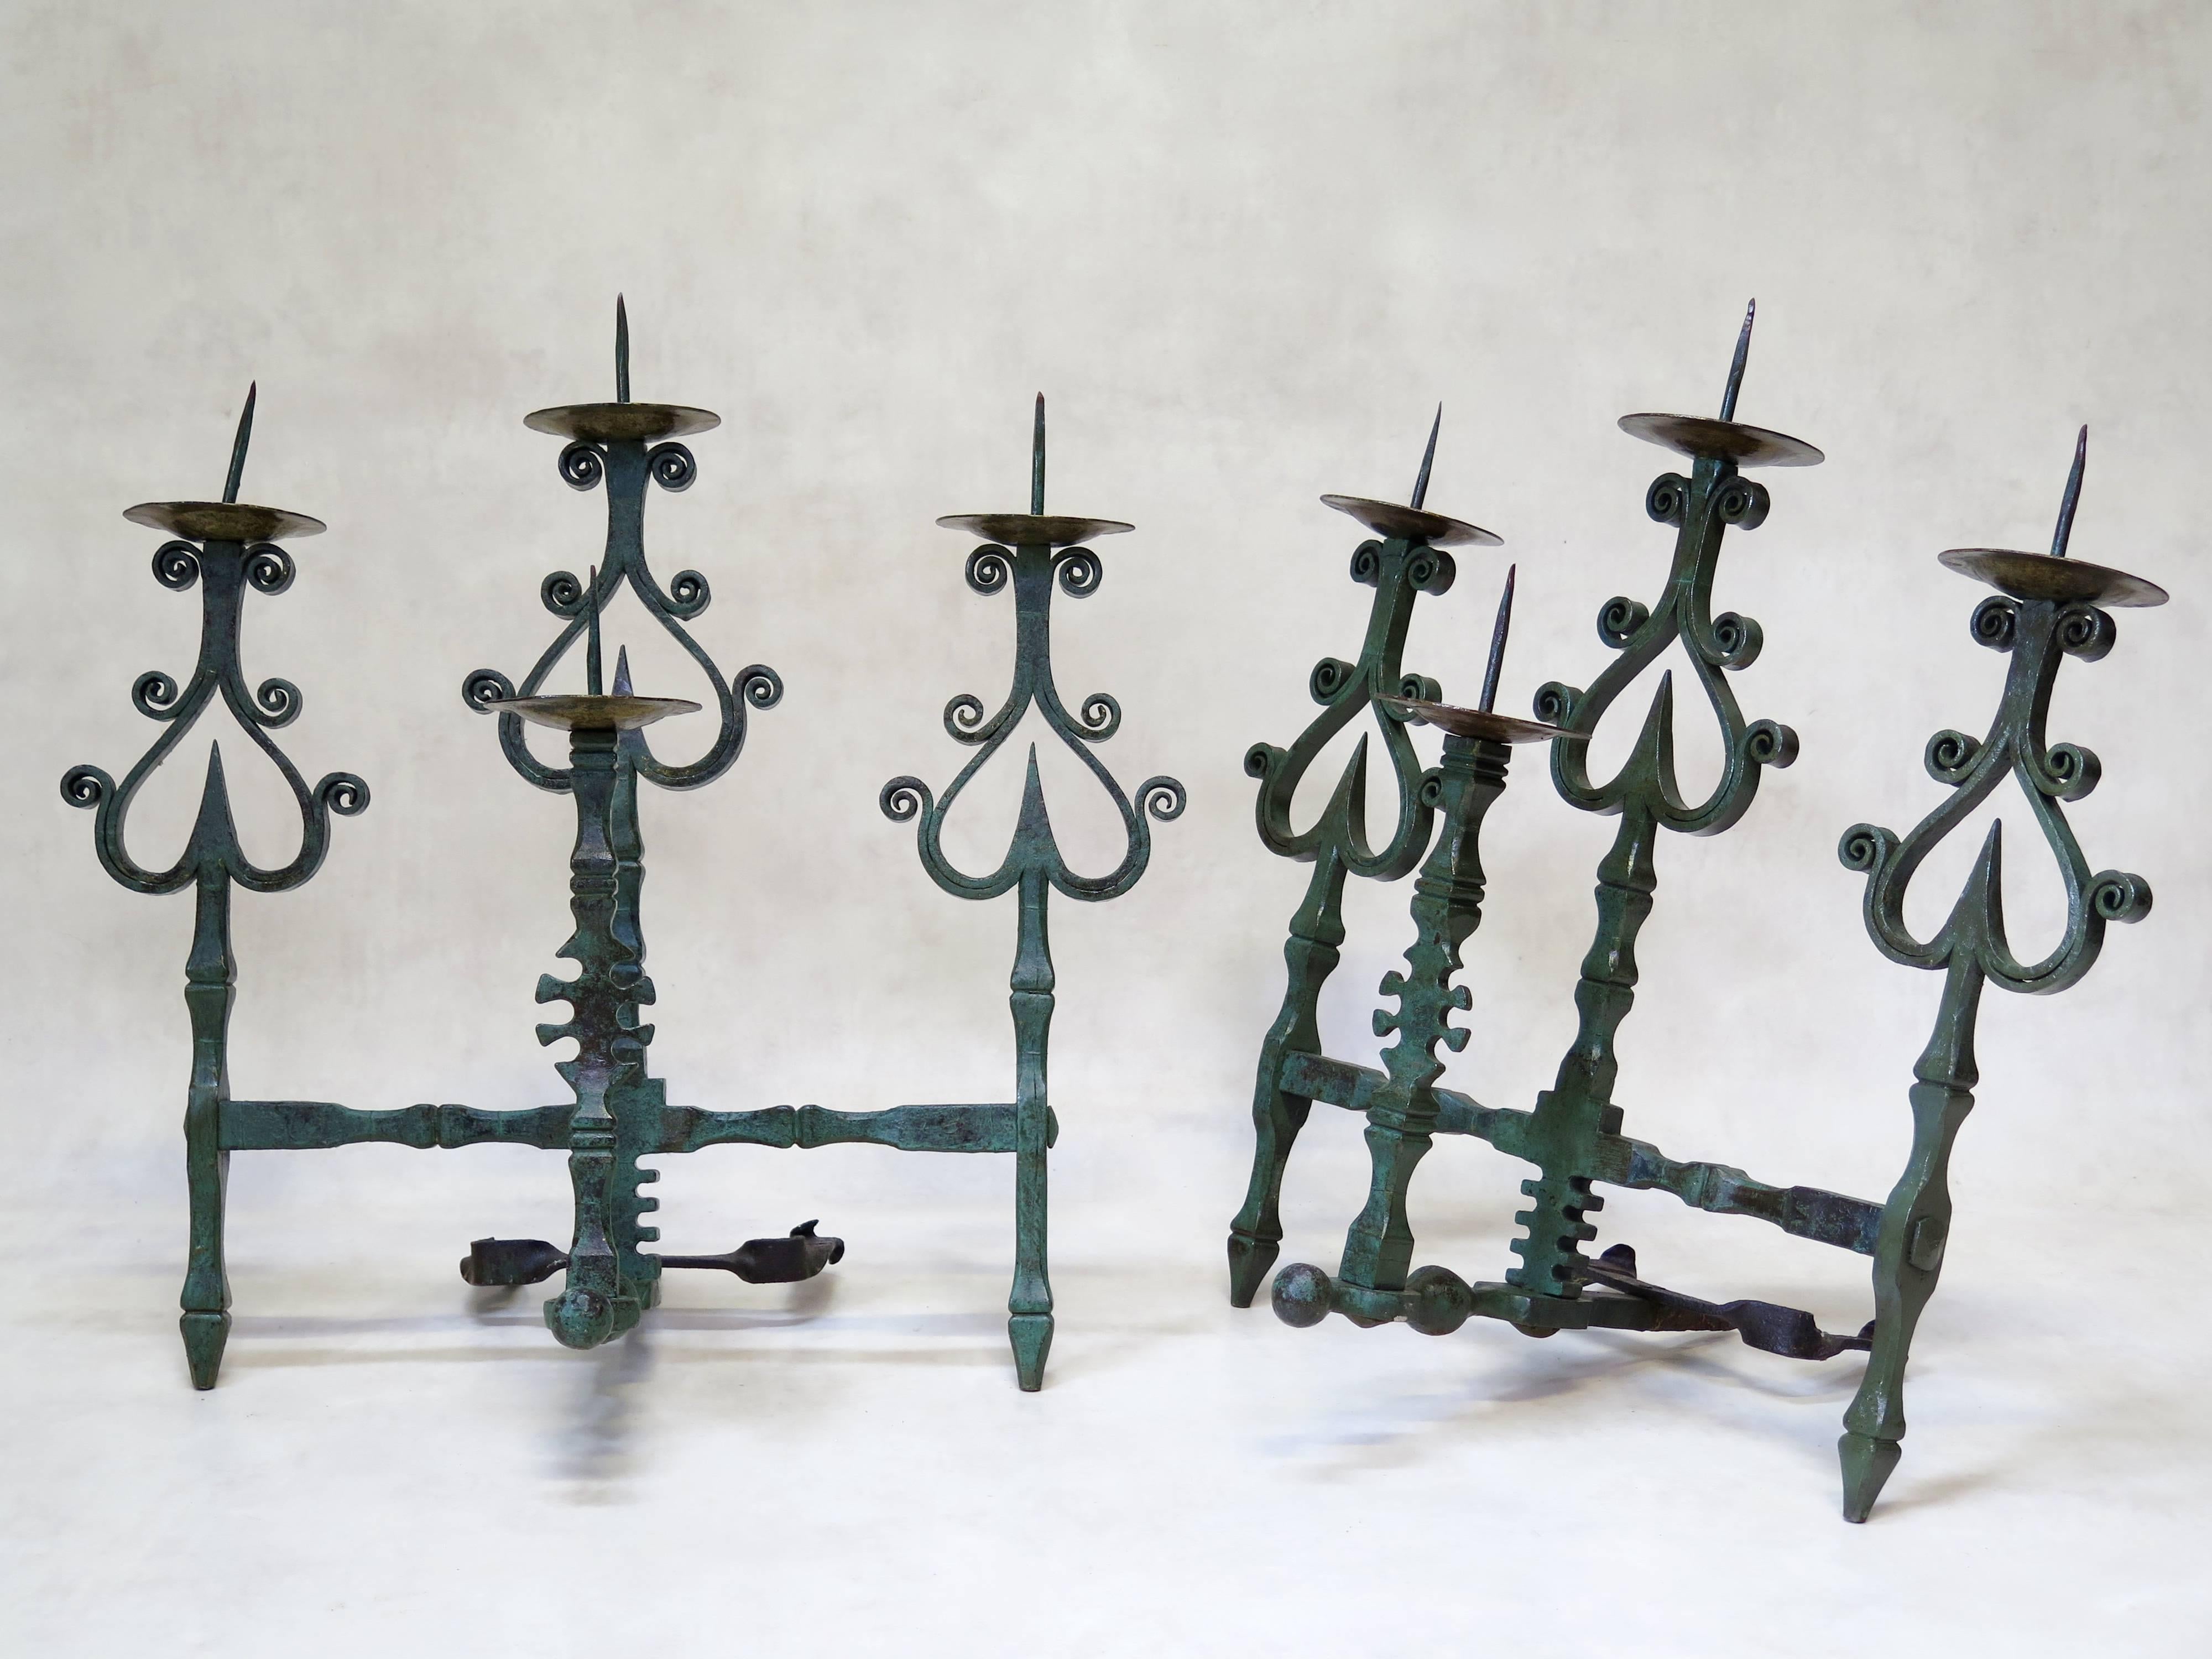 Stunning pair of unusual mural candleholders in heavy hand-wrought iron with a lovely Verdigris patina. Each candleholder holds four candles.